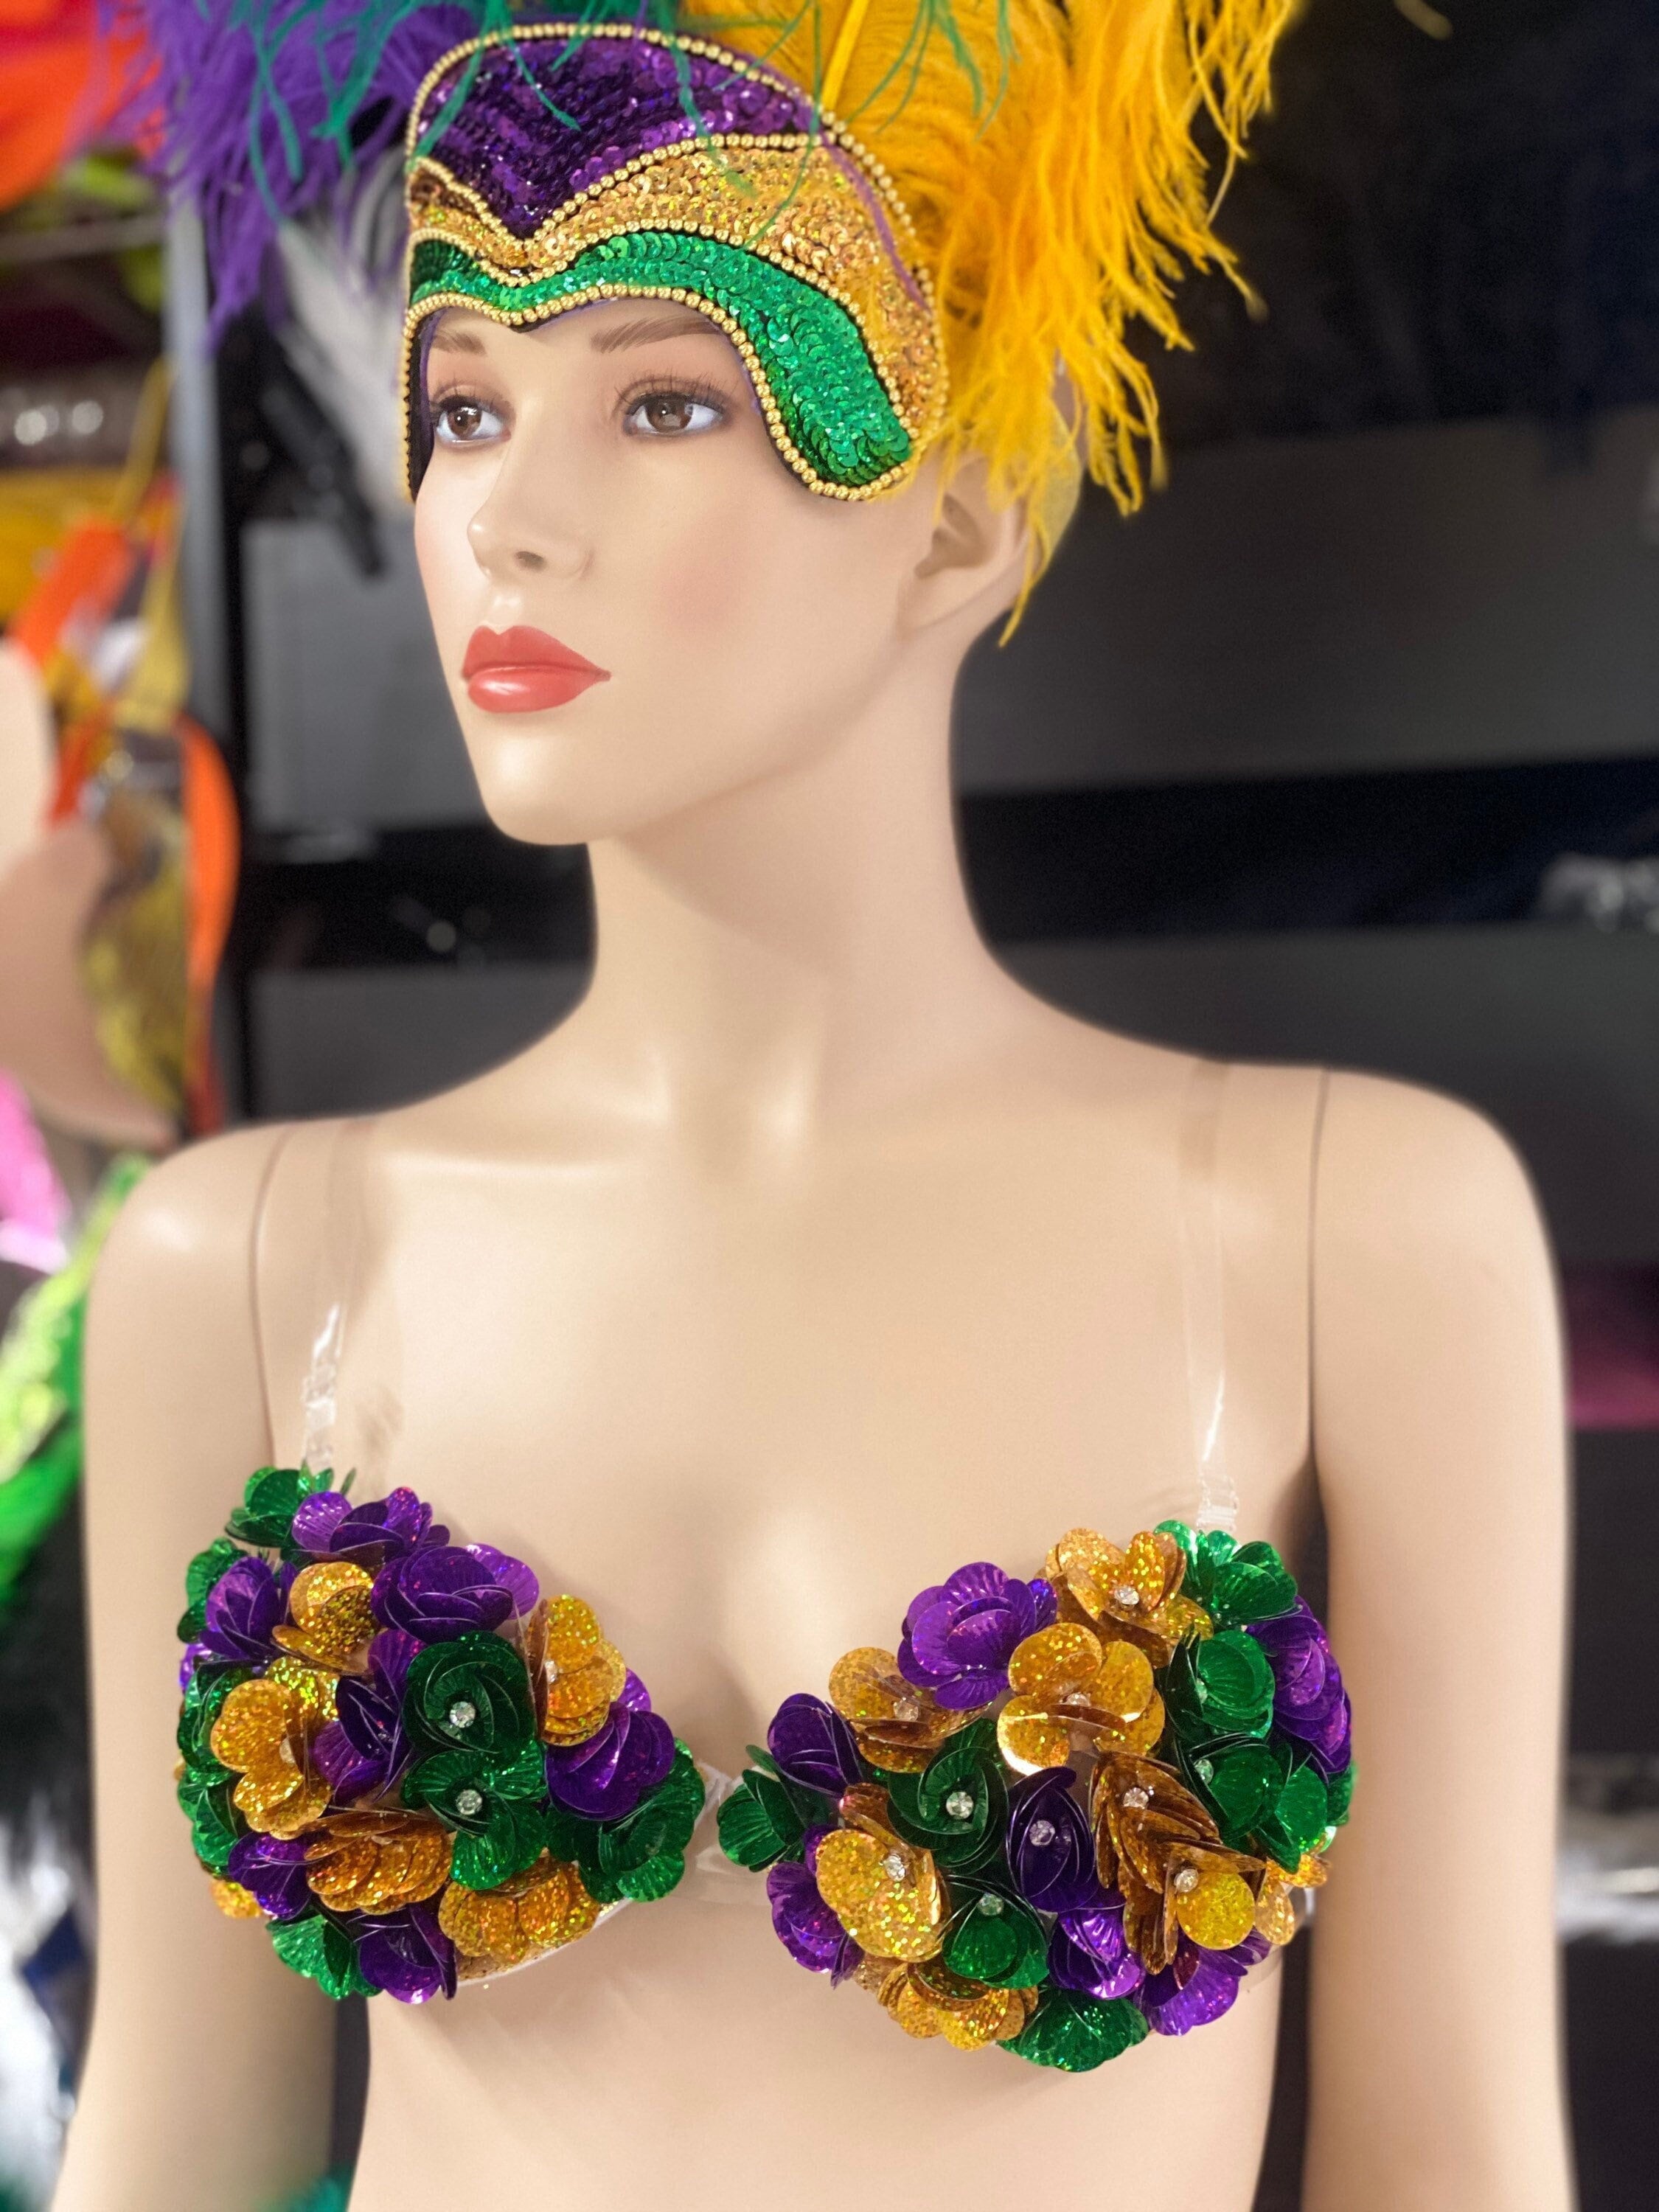 Mardi Gras Top Sequined Bra Mardi Gras Feather Headpiece Headdress Tail  Purple Gold Green Top Made in and Shipped From the USA 